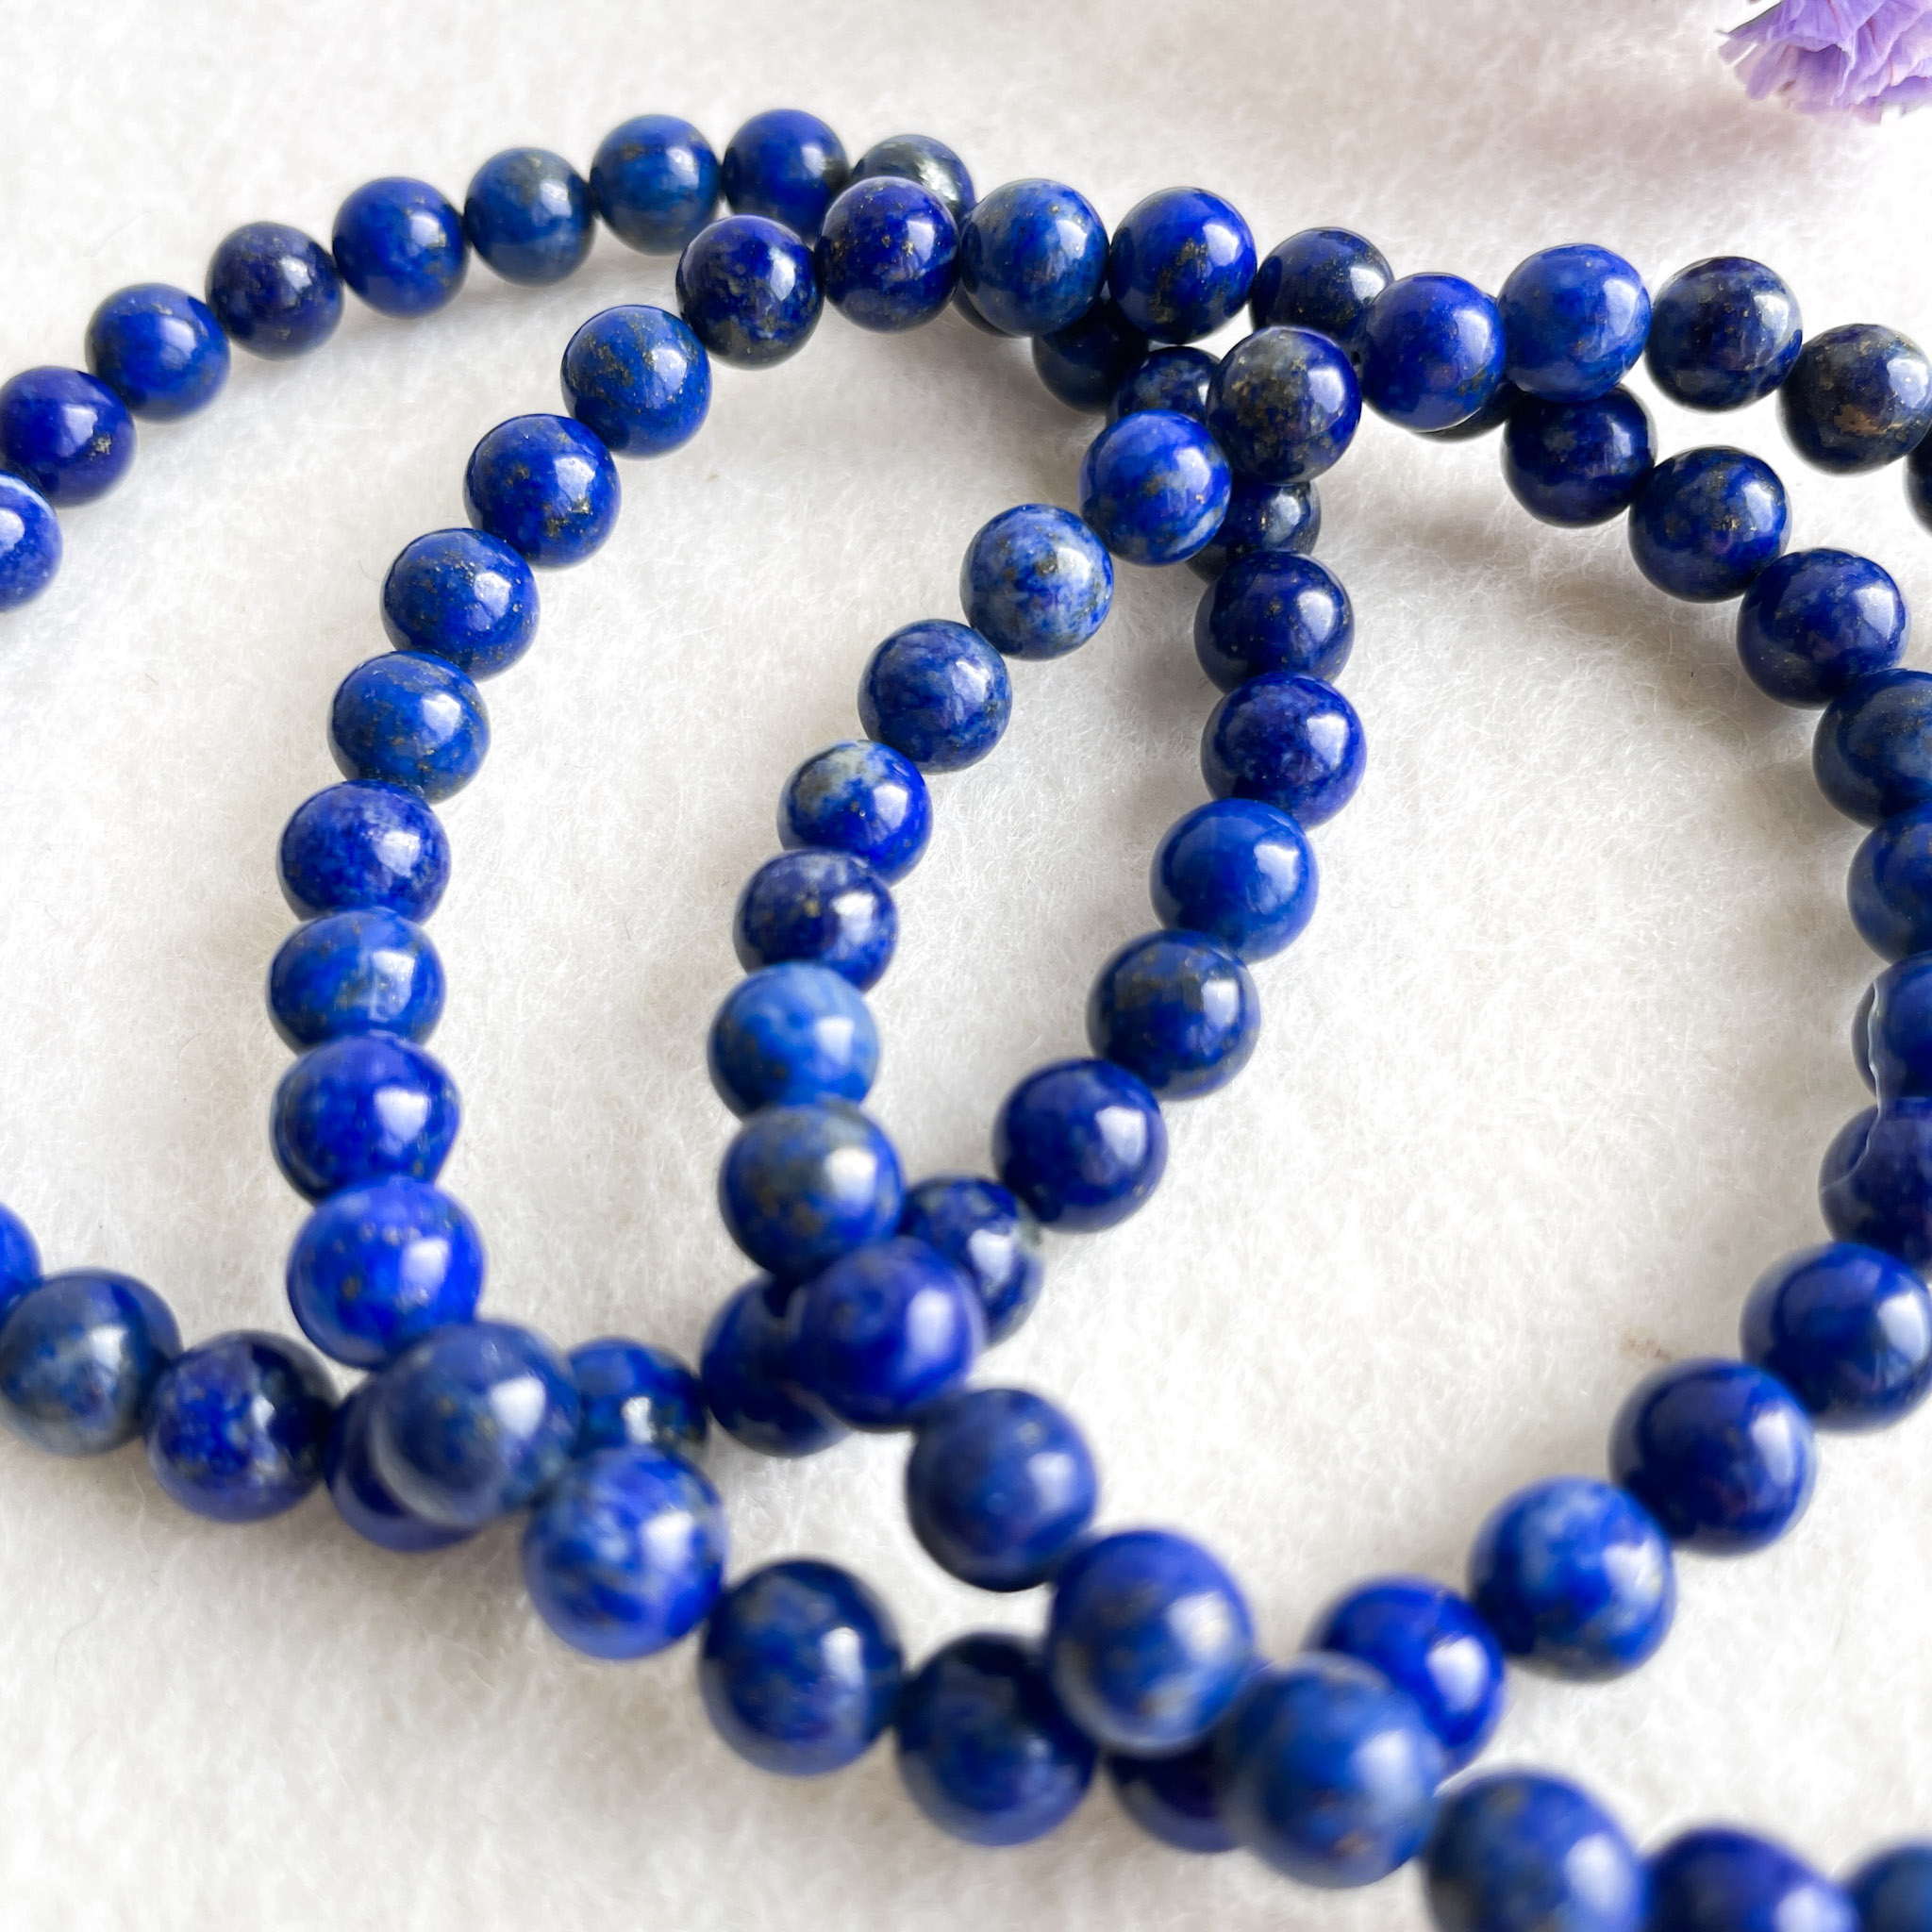 A string of lapis lazuli beads with a deep blue color and natural gold flecks, arranged in a loop on a white surface.